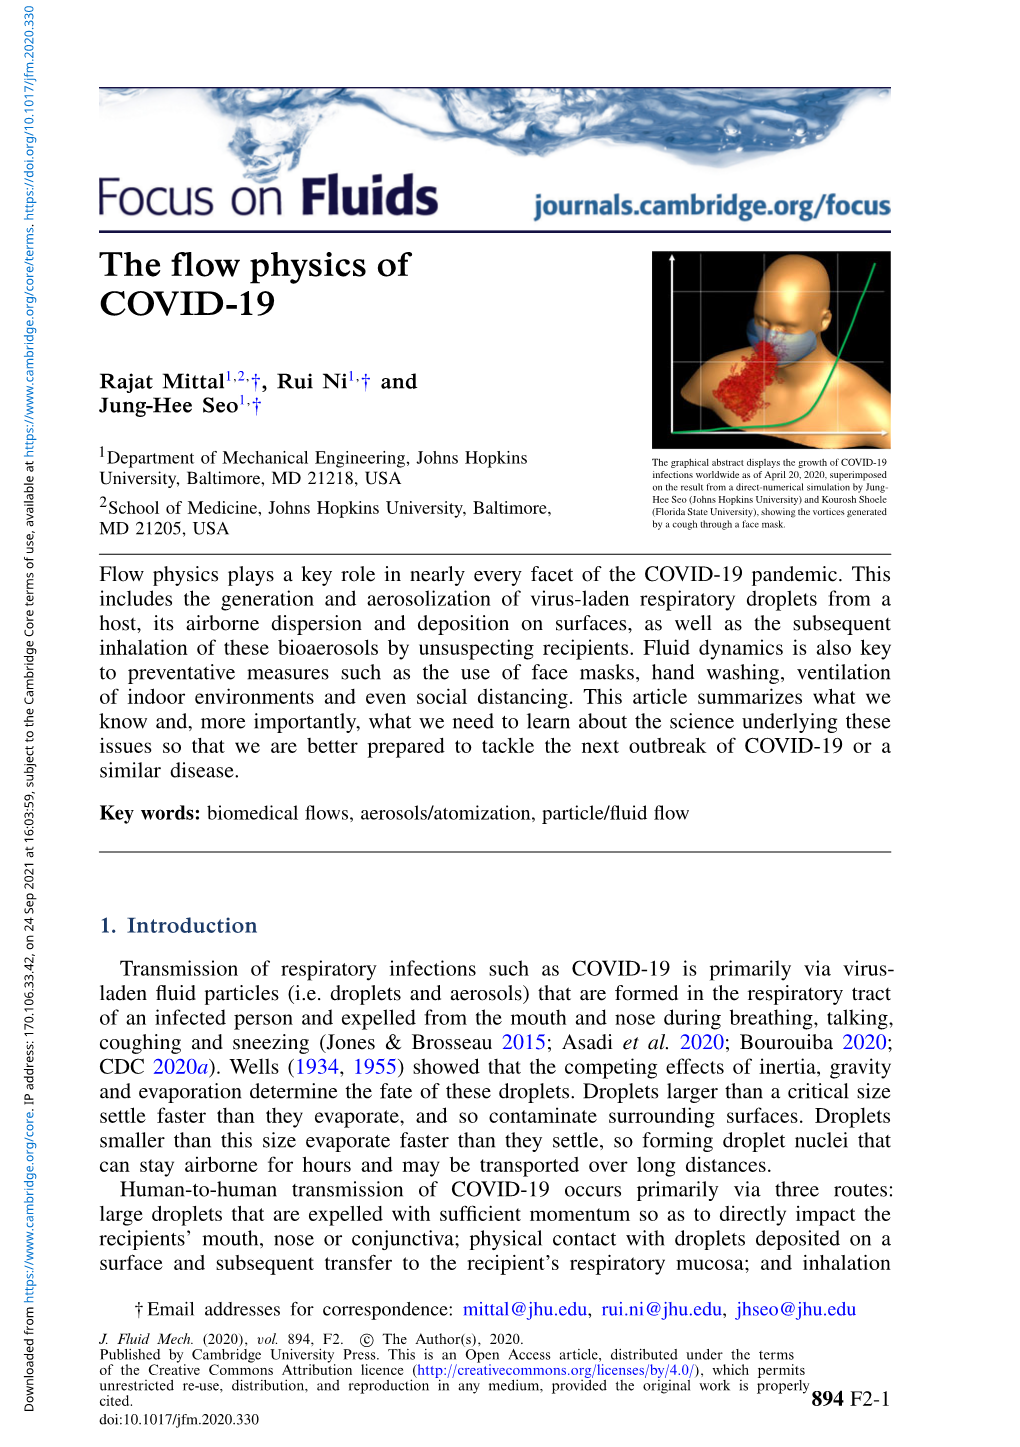 The Flow Physics of COVID-19